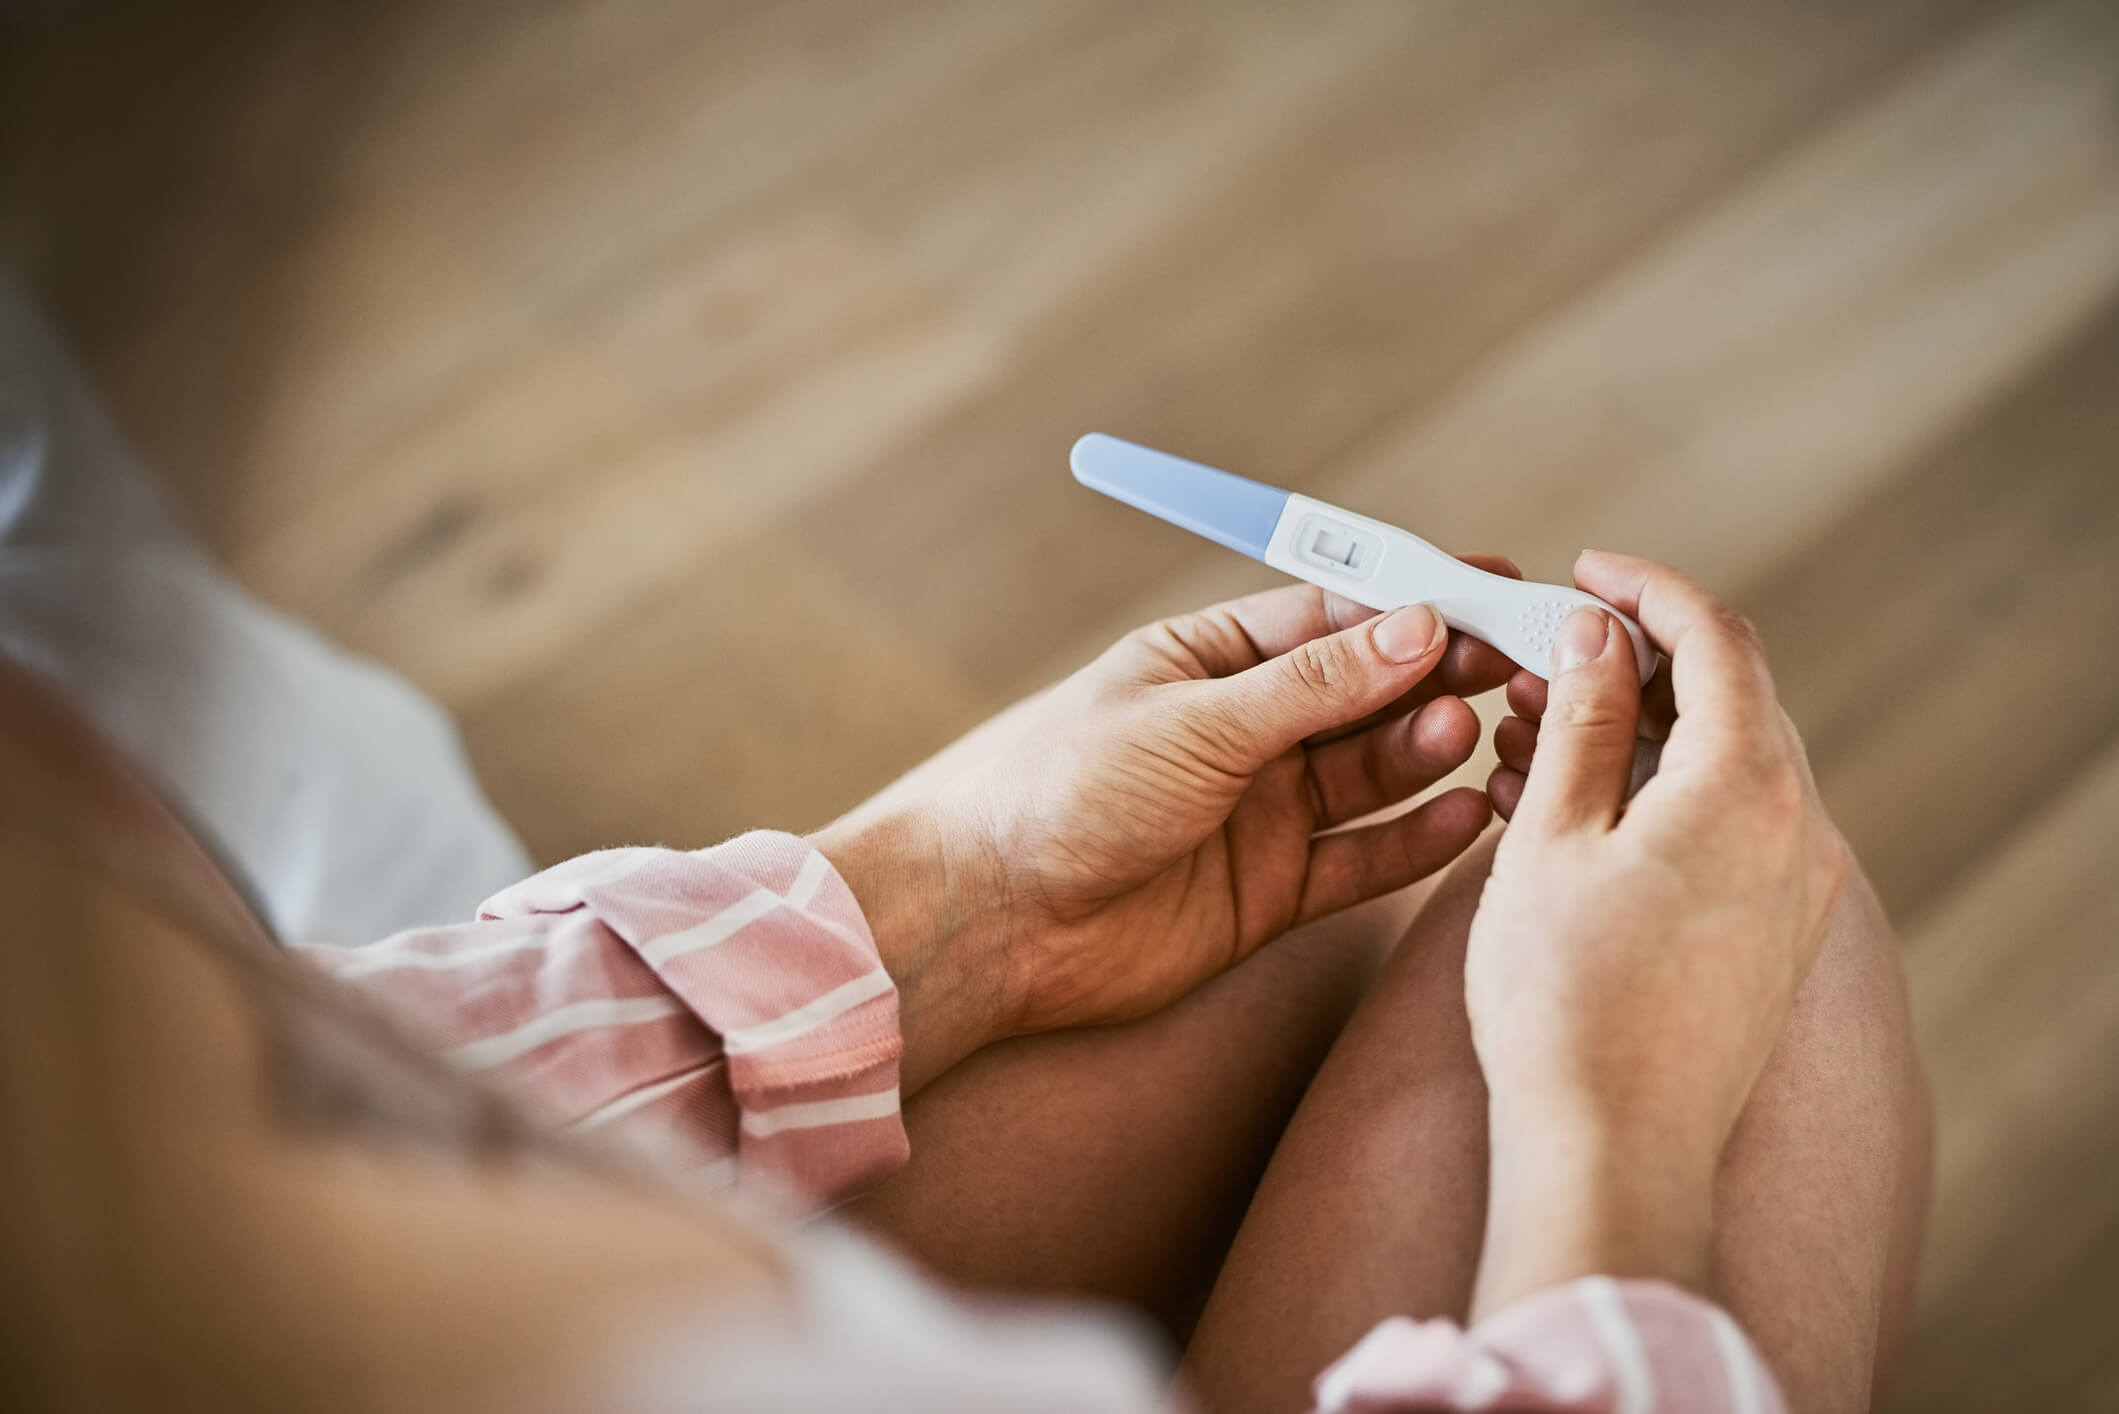 Are Pregnancy Tests Accurate? University OB/GYN Associates